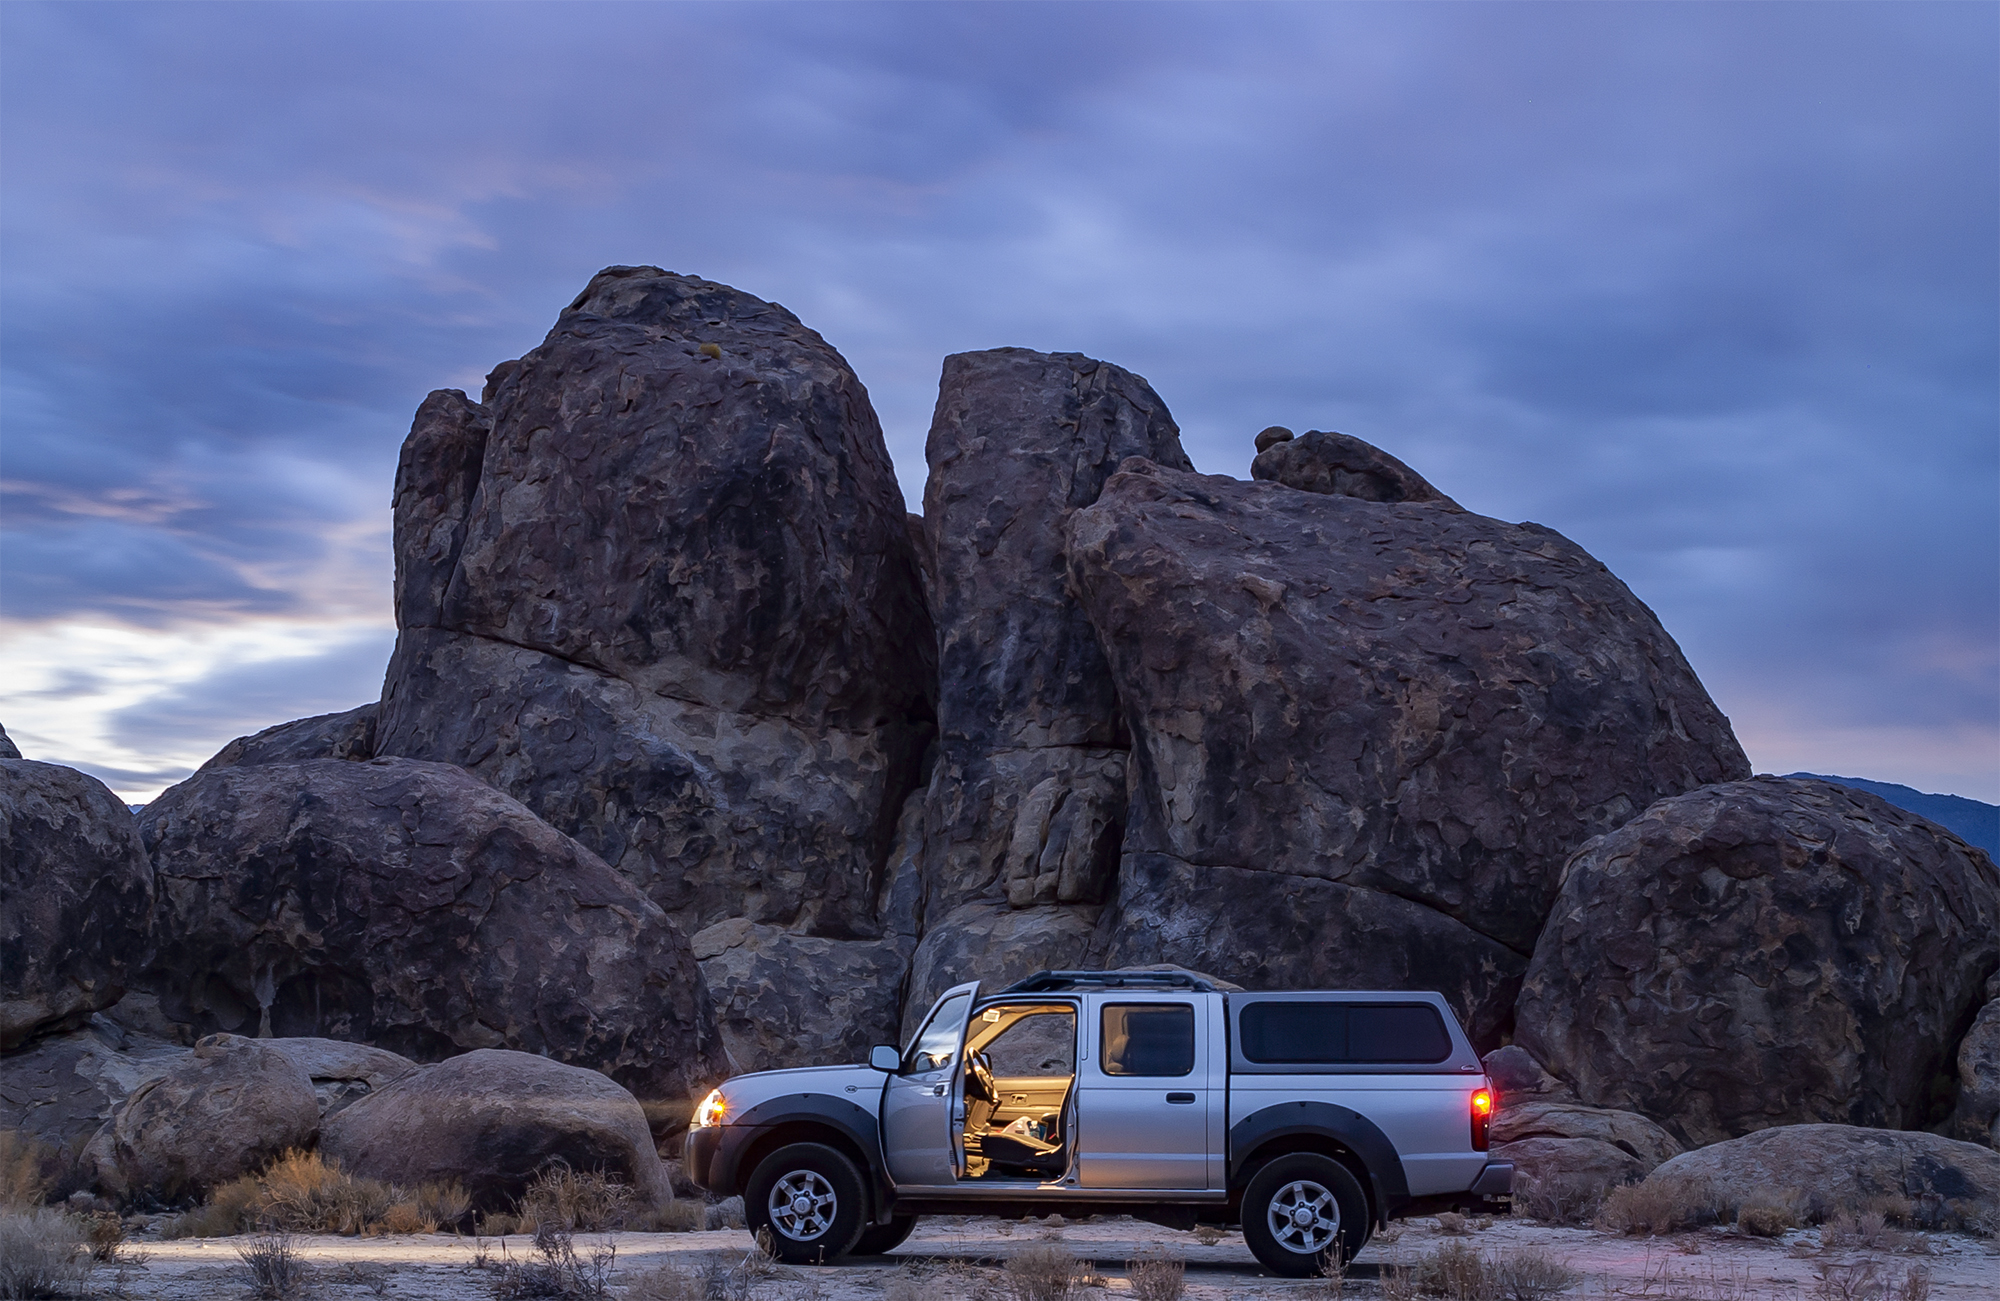 2001 Nissan Frontier Crew Cab in the Alabama Hills, California